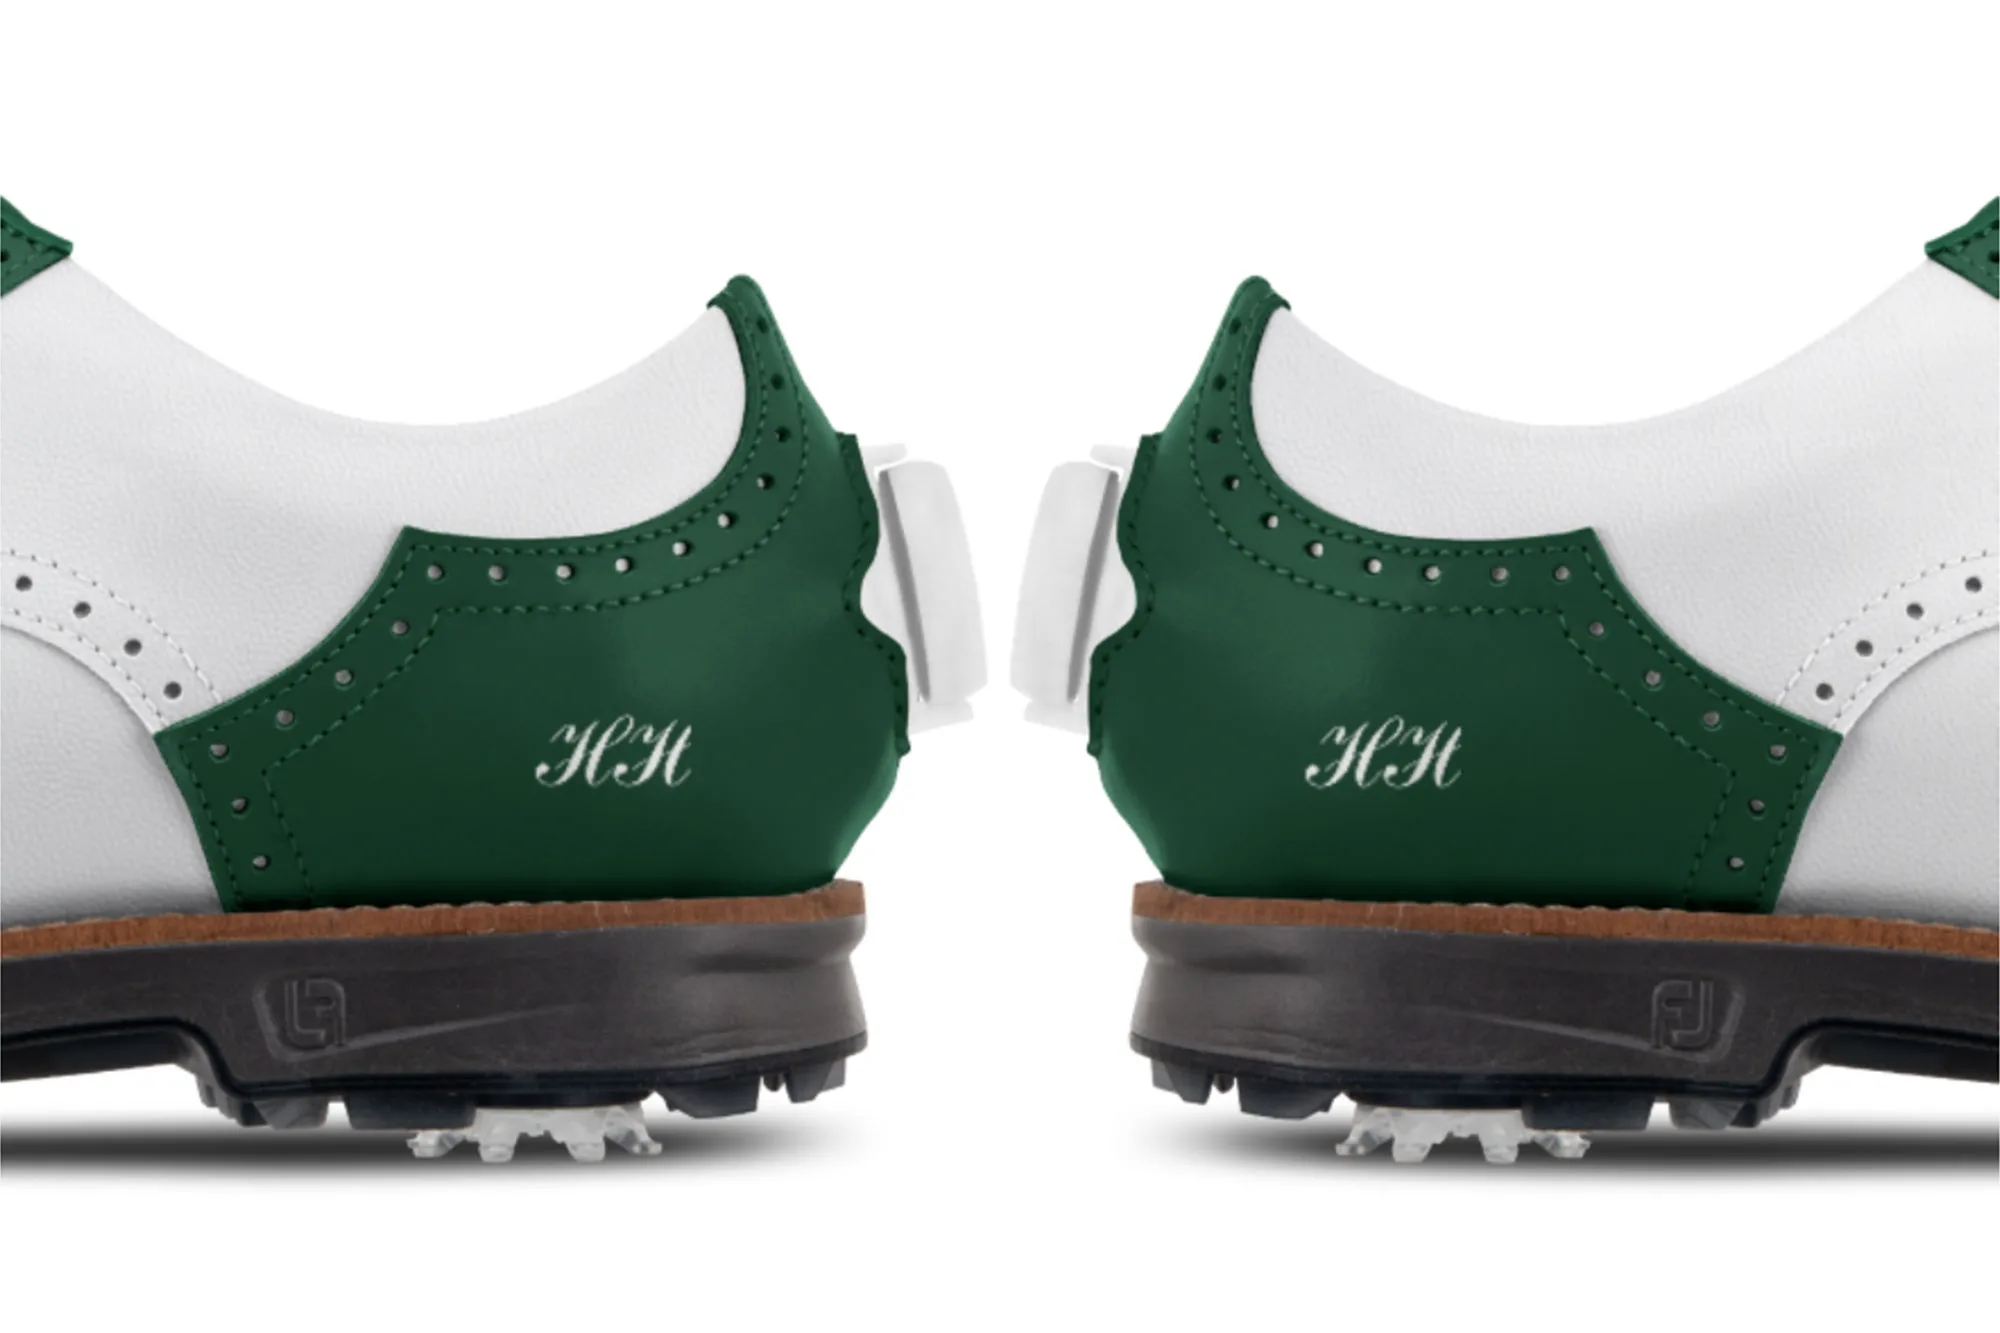 WIN: A pair of custom FootJoy MyJoy golf shoes designed by YOU!